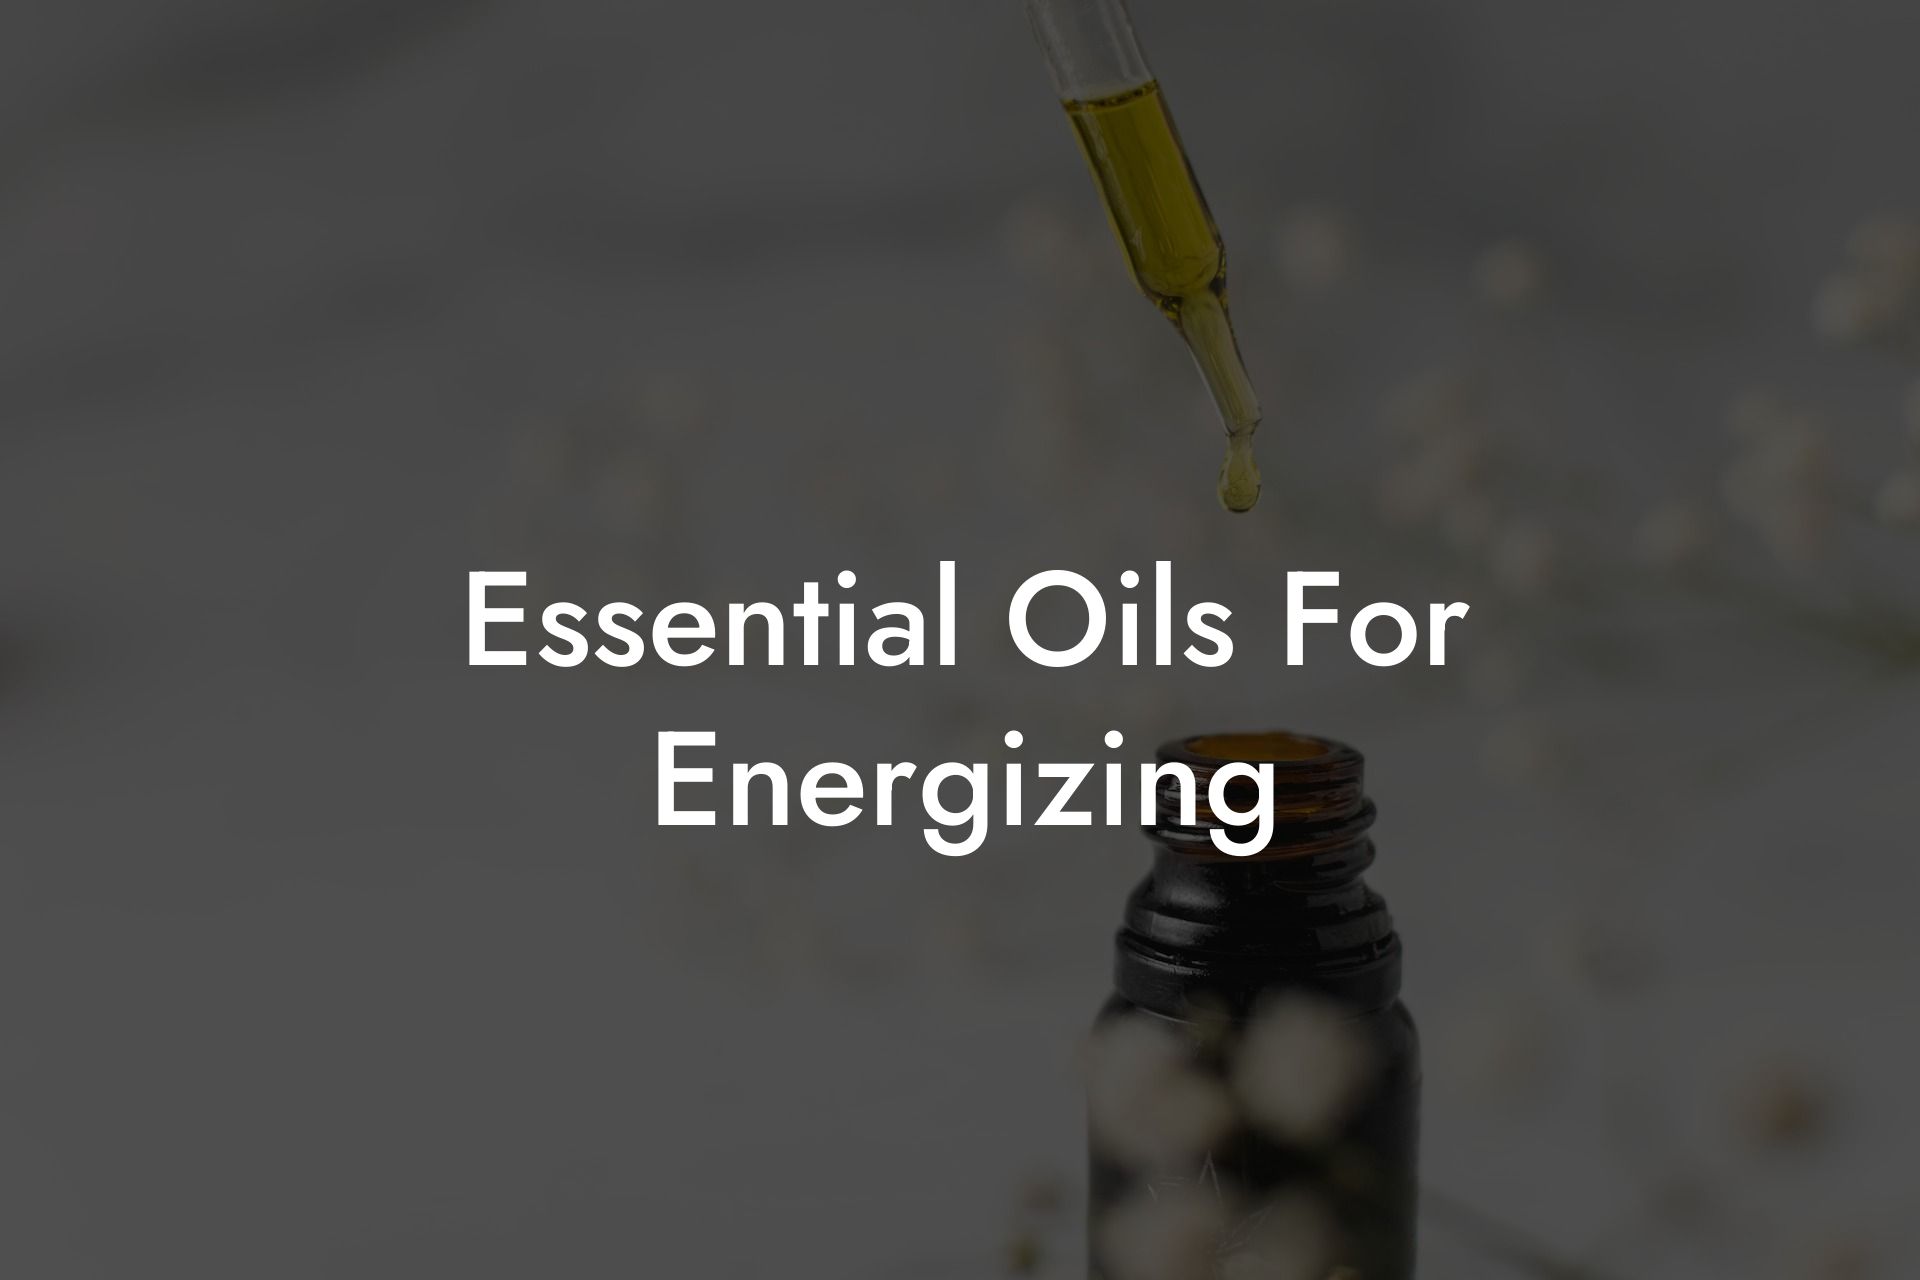 Essential Oils For Energizing